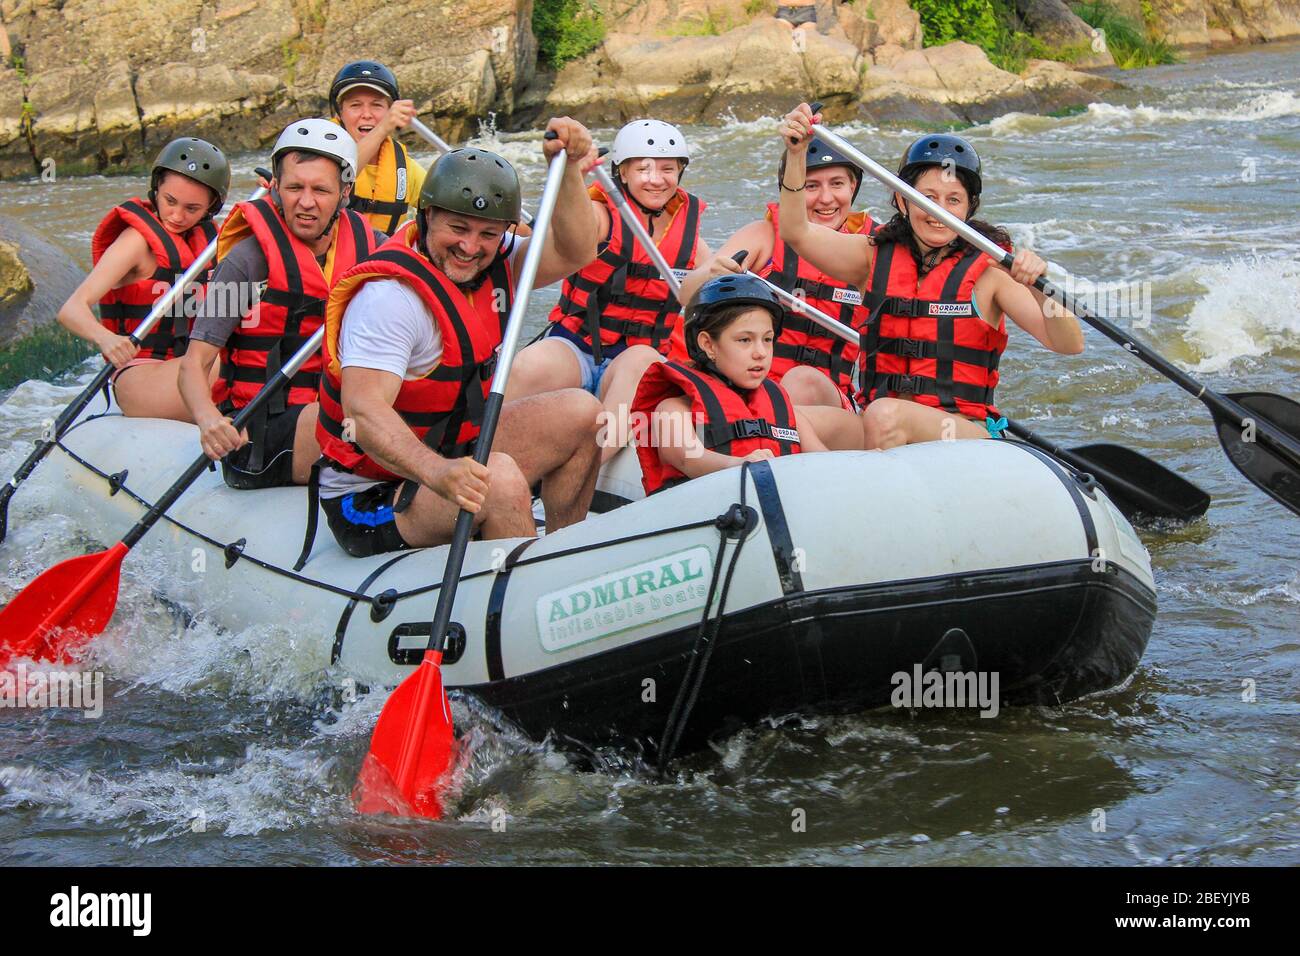 Mygiya / Ukraine - June 26 2018: Young person rafting on the river, extreme and fun sport at tourist attraction. Rafting on the  Pivdennyi Buh River Stock Photo